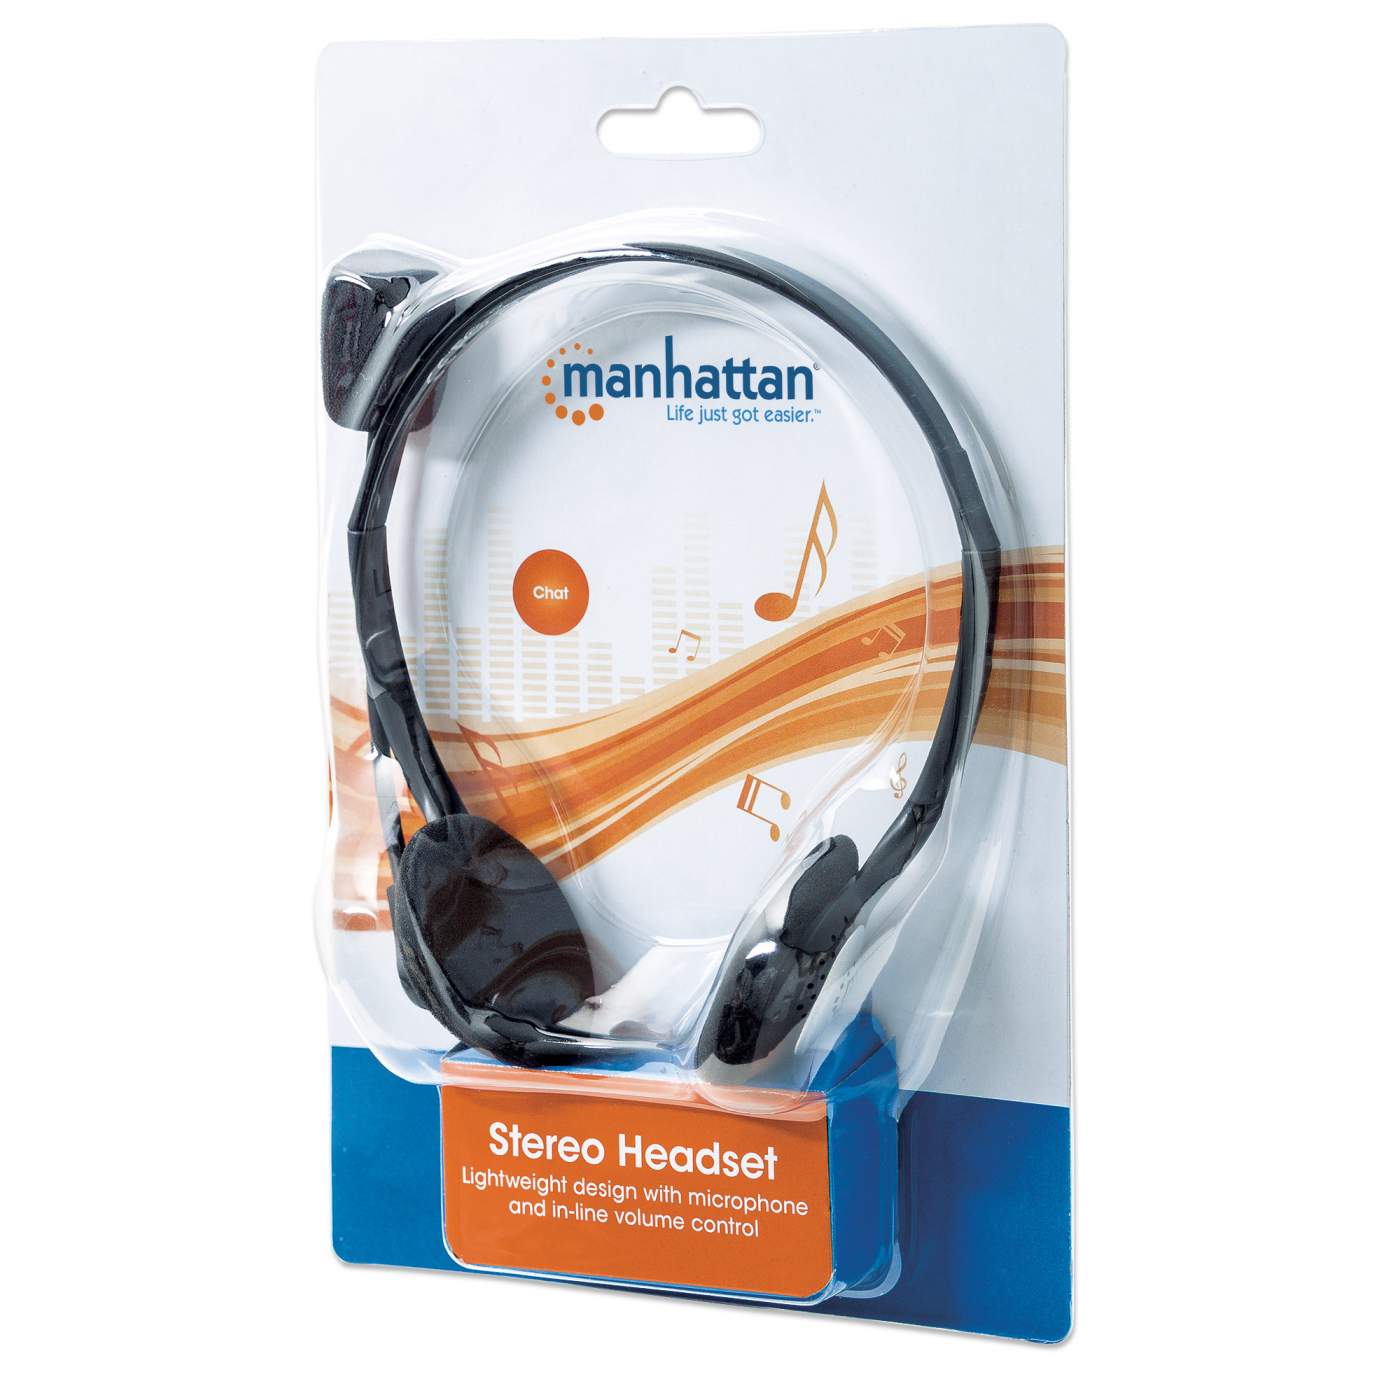 Stereo Headset Packaging Image 2